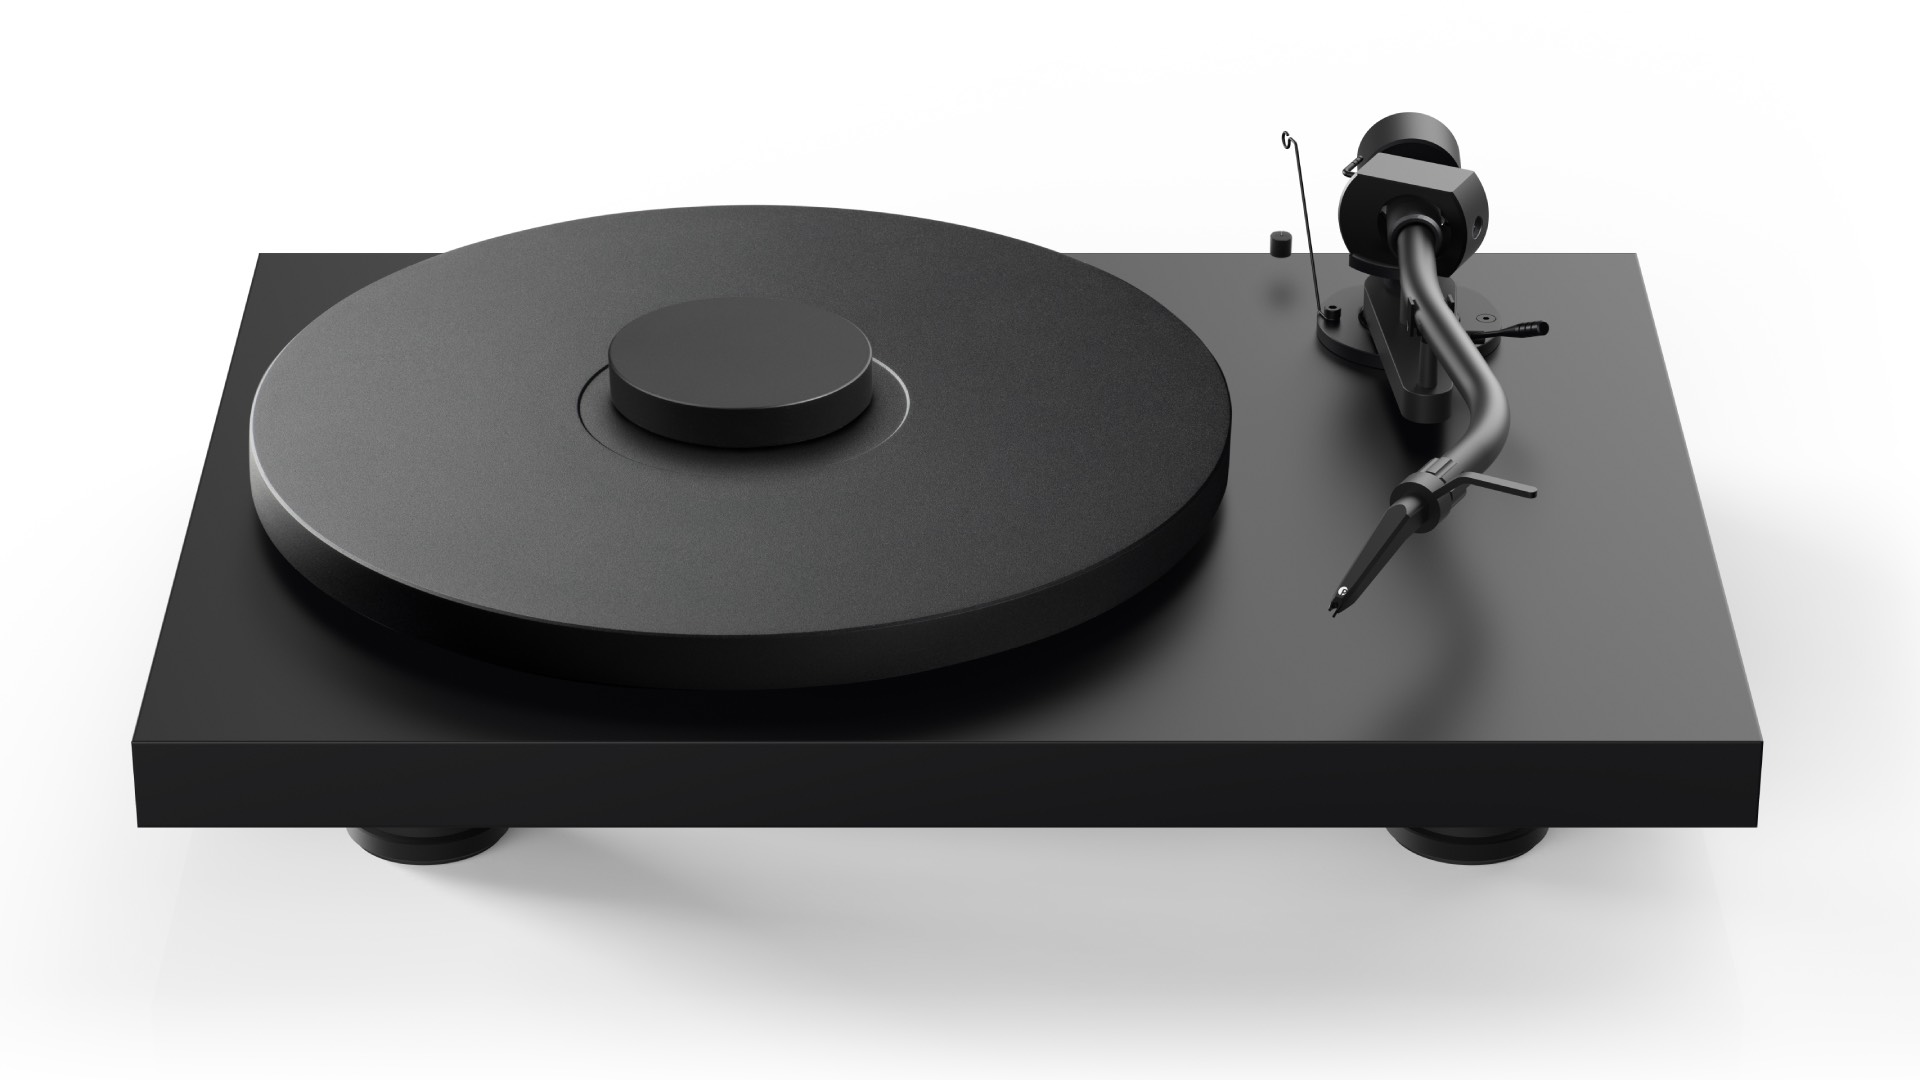 Pro-Ject Debut S equipped with an S tonearm in black finish. (Image Credit: Pro-Ject)